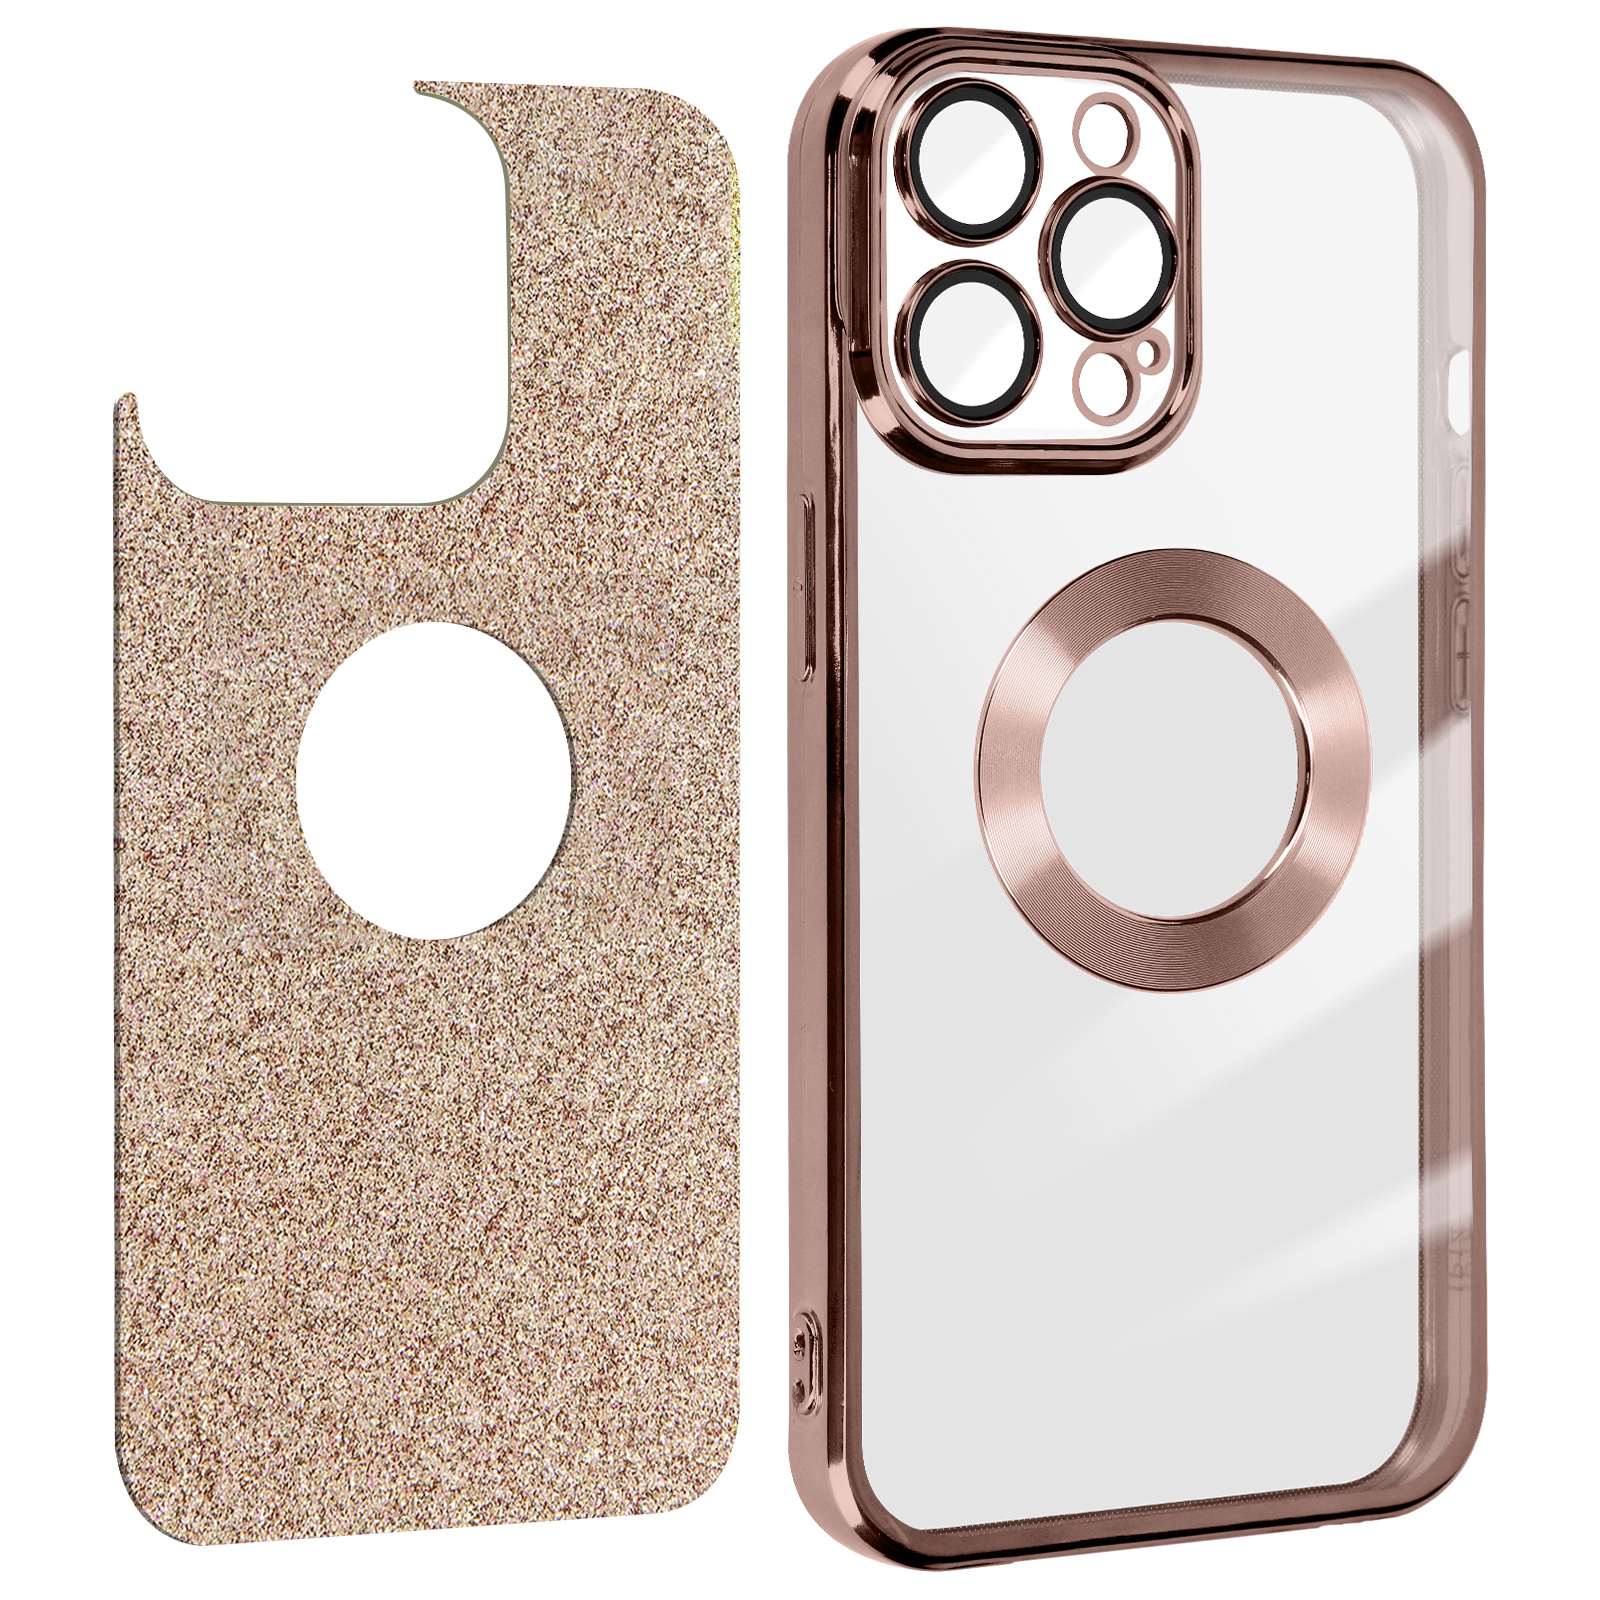 Spark Rosegold Max, 13 Apple, AVIZAR Series, Pro Backcover, Protecam iPhone